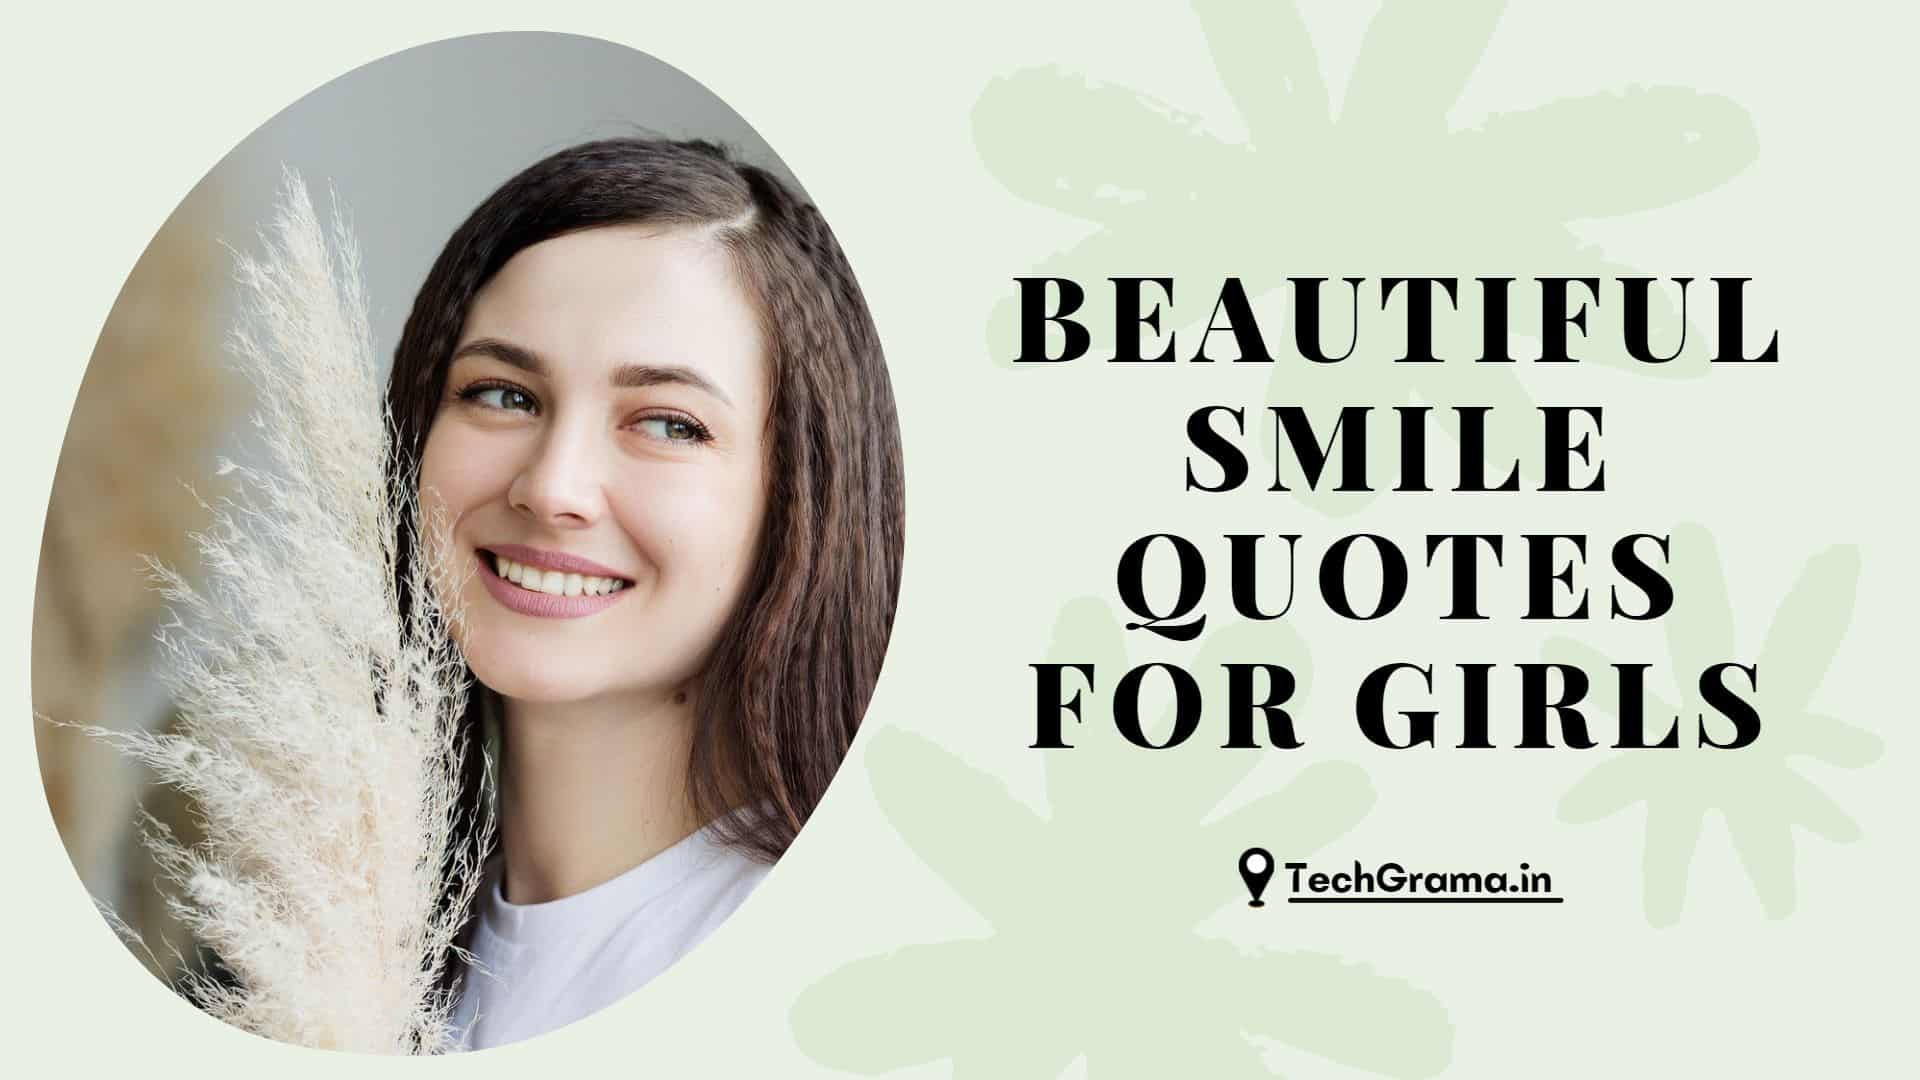 Best Smile Quotes For Girls, Instagram Quotes For Girls Smile, Savage Smile Quotes For Girls, Smile Quotes For Instagram For Girls, Beautiful Smile Quotes For Girls, Short Smile Quotes For Girls, Smile Quotes For Females, Quotes For Instagram Post For Girl Smile, Girl Smile Quotes For Instagram.